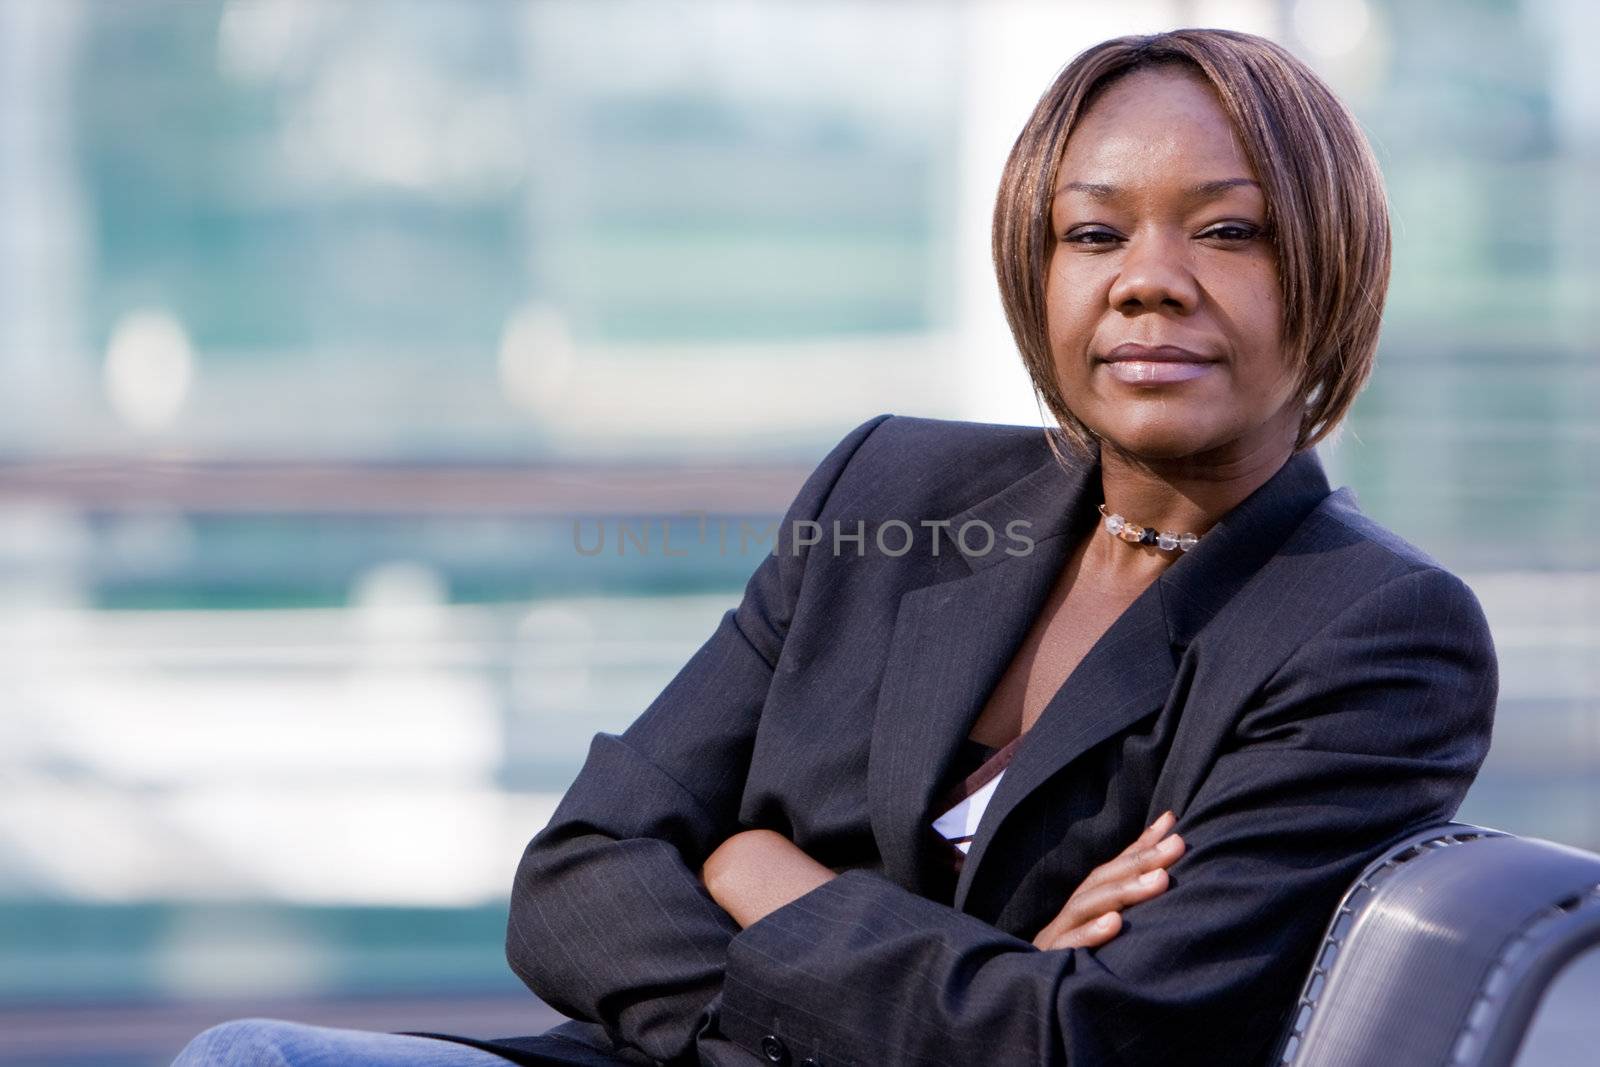 Black african american business woman posing in front of a modern office building with arms folded